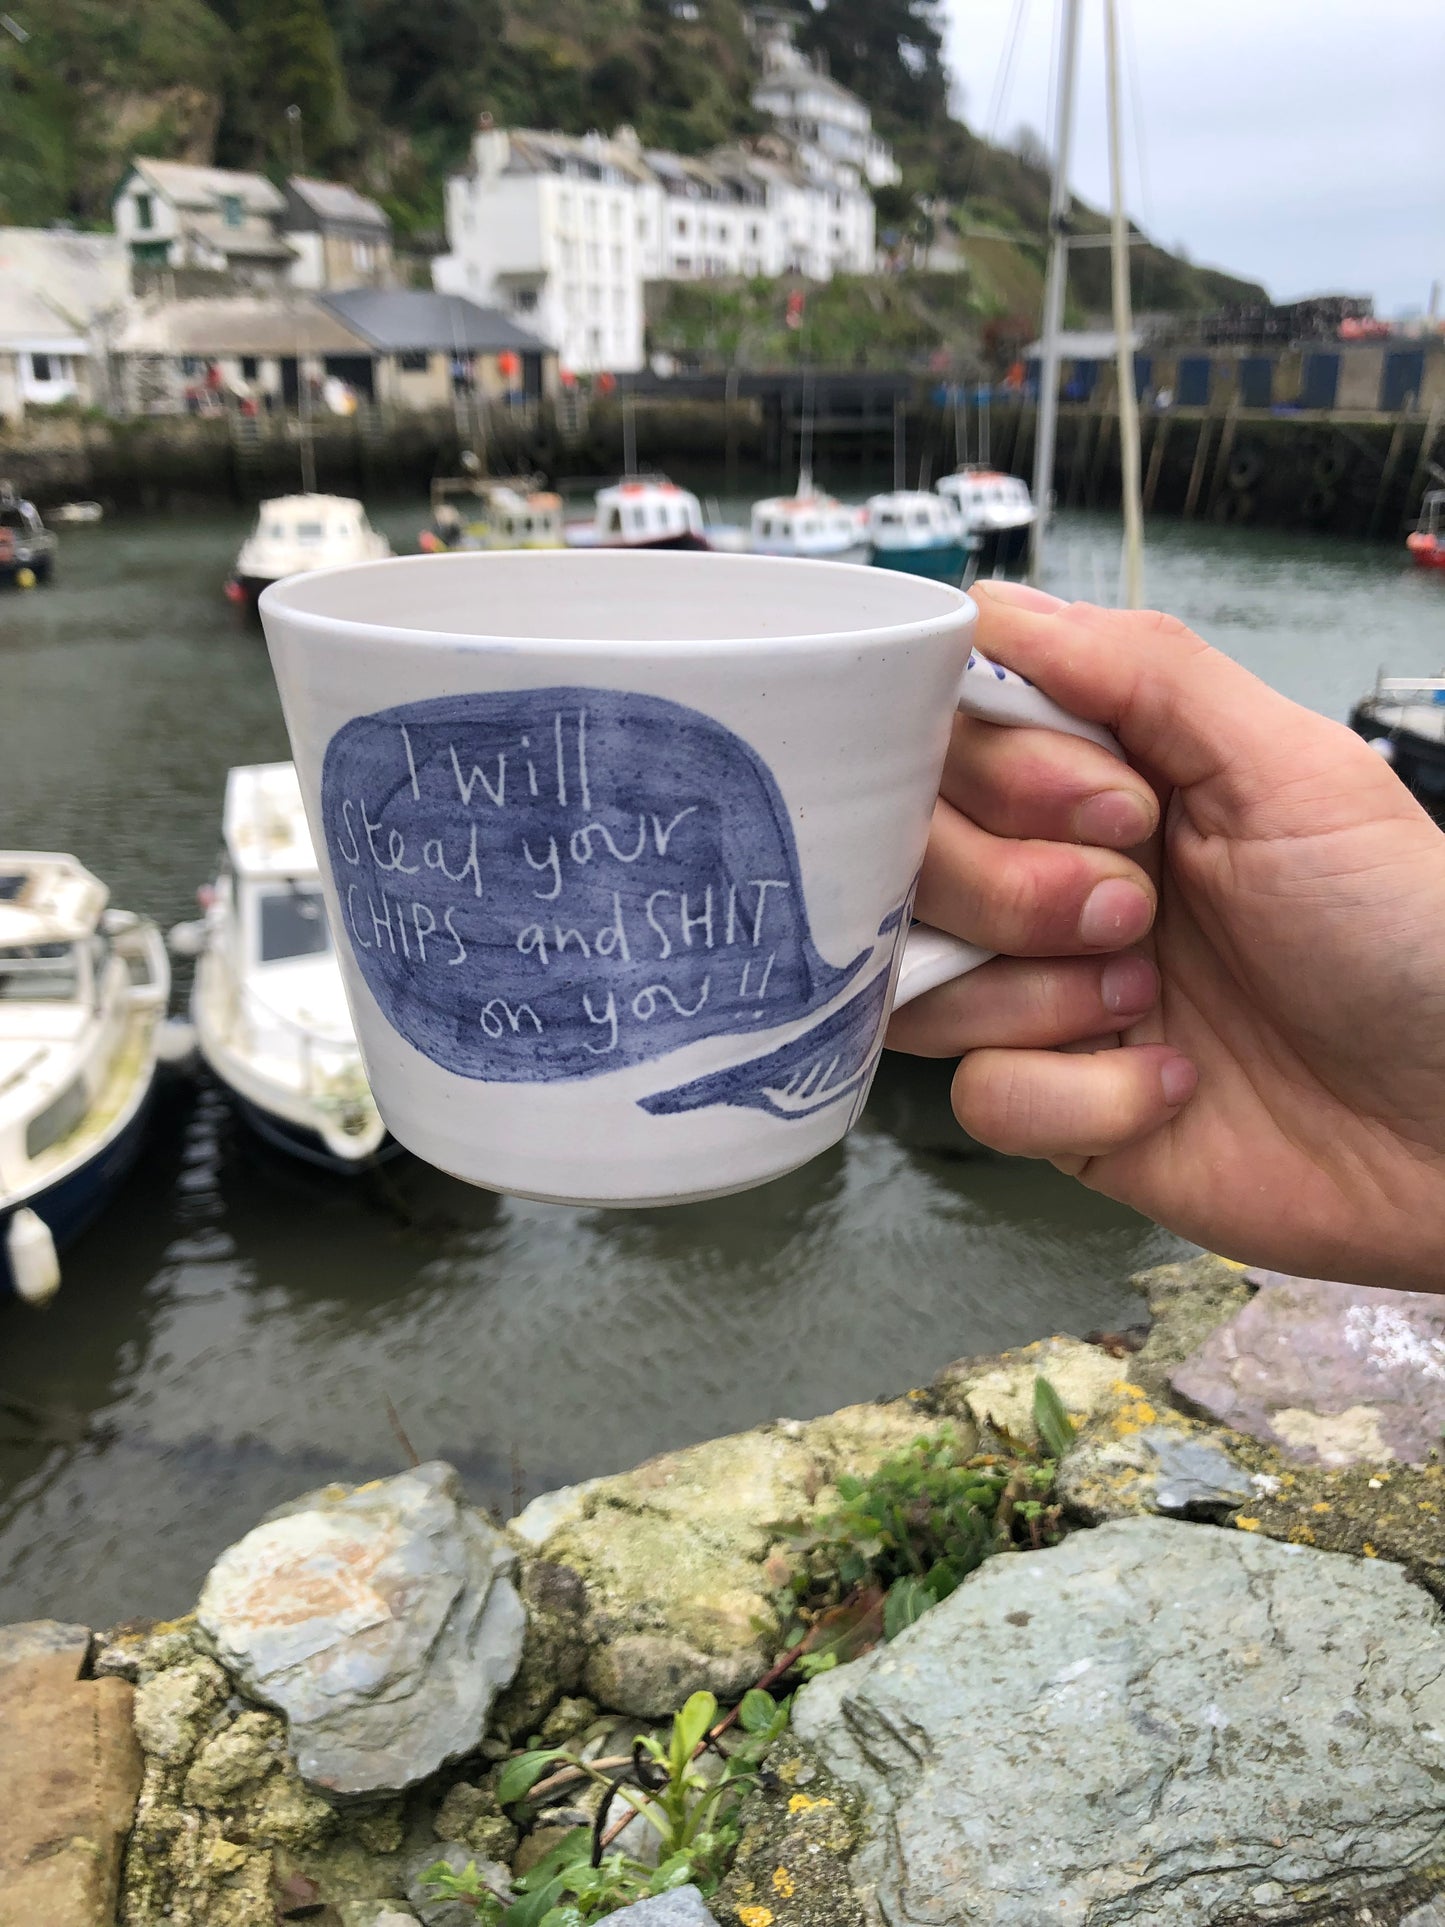 Seagull Mug “I will steal your chips”